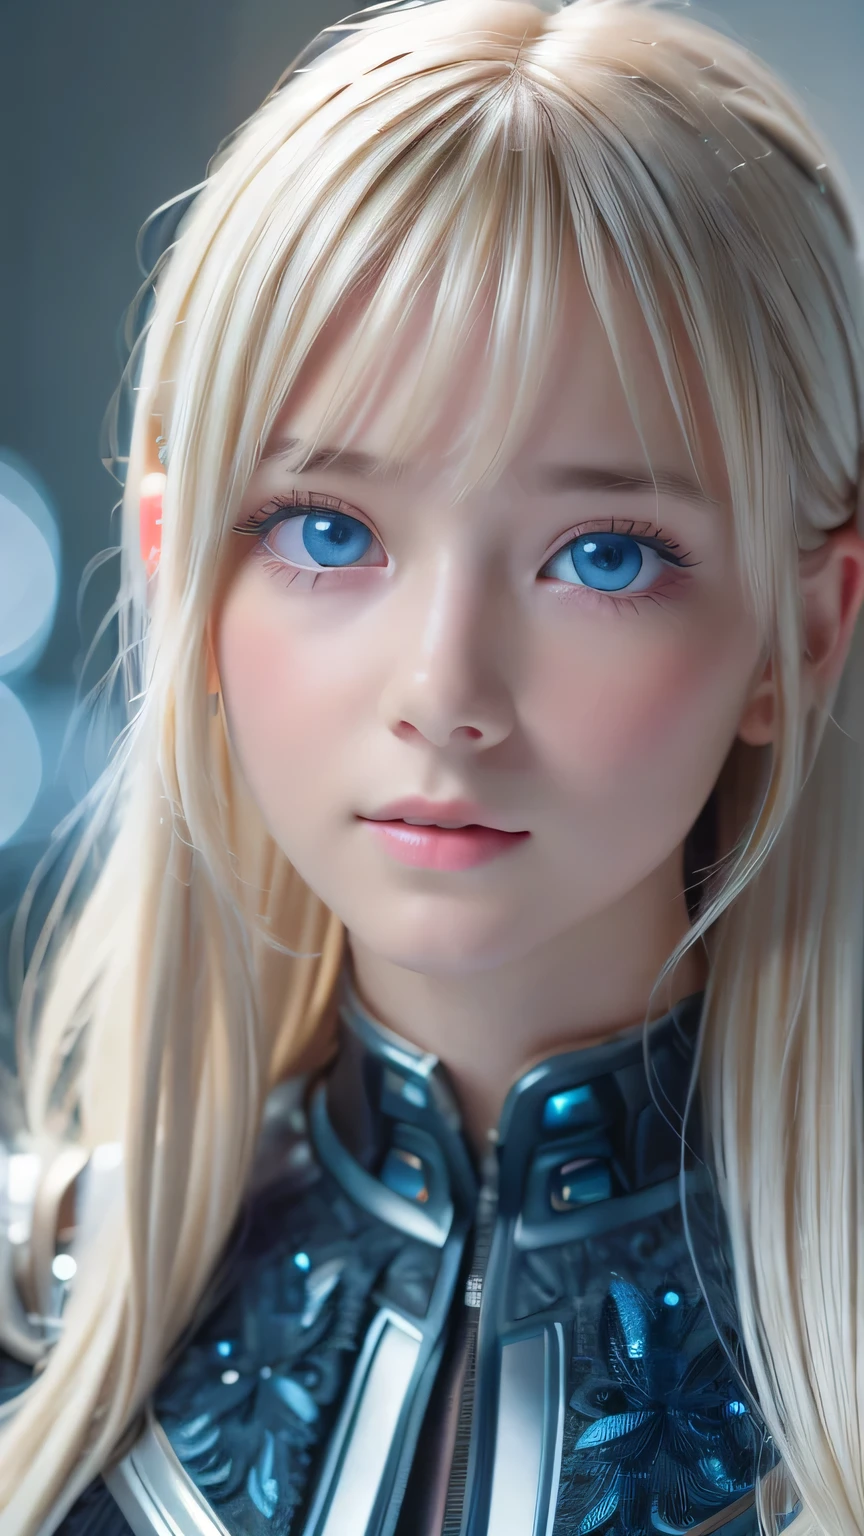 highest quality、8k Masterpiece、Ultra-high resolution、(Realistic:1.3)、RAW Photos、14 year old Scandinavian girl with shiny blonde hair、Silvery blonde hair、Super long straight hair、Bangs between the eyes、Bangs that cover the eyes、片Bangs that cover the eyes、Bangs between the eyes、White and glowing skin、1. Cyberpunk Super Beautiful Soldier、((Ultra-Realistic Details))、Portraiture、Global Illumination、Shadow Realm、Octane Rendering、8k、Ultra Sharp、Metal、Cool colors、、Very intricate detail、Realistic Light、Trends of the CG Association、so beautiful, Big bright blue eyes、Very big eyes、Eyes shining at the camera、Neon Details、Small Face Beauty、Round face、Cheek highlight